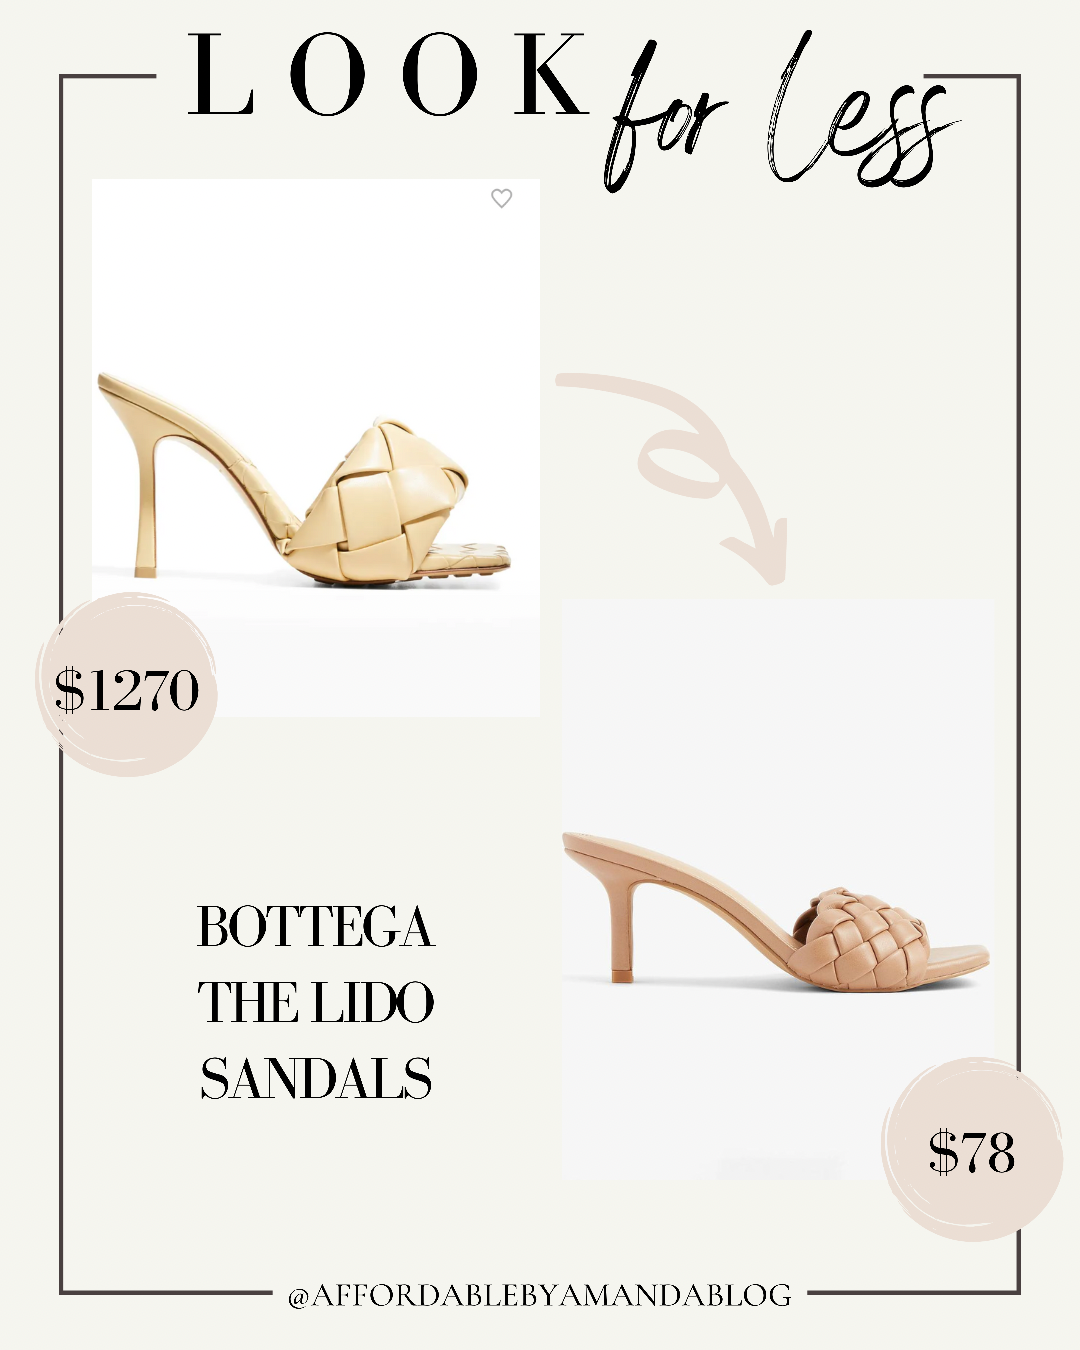 Look for Less - Bottega The Lido Sandals - Affordable by Amanda